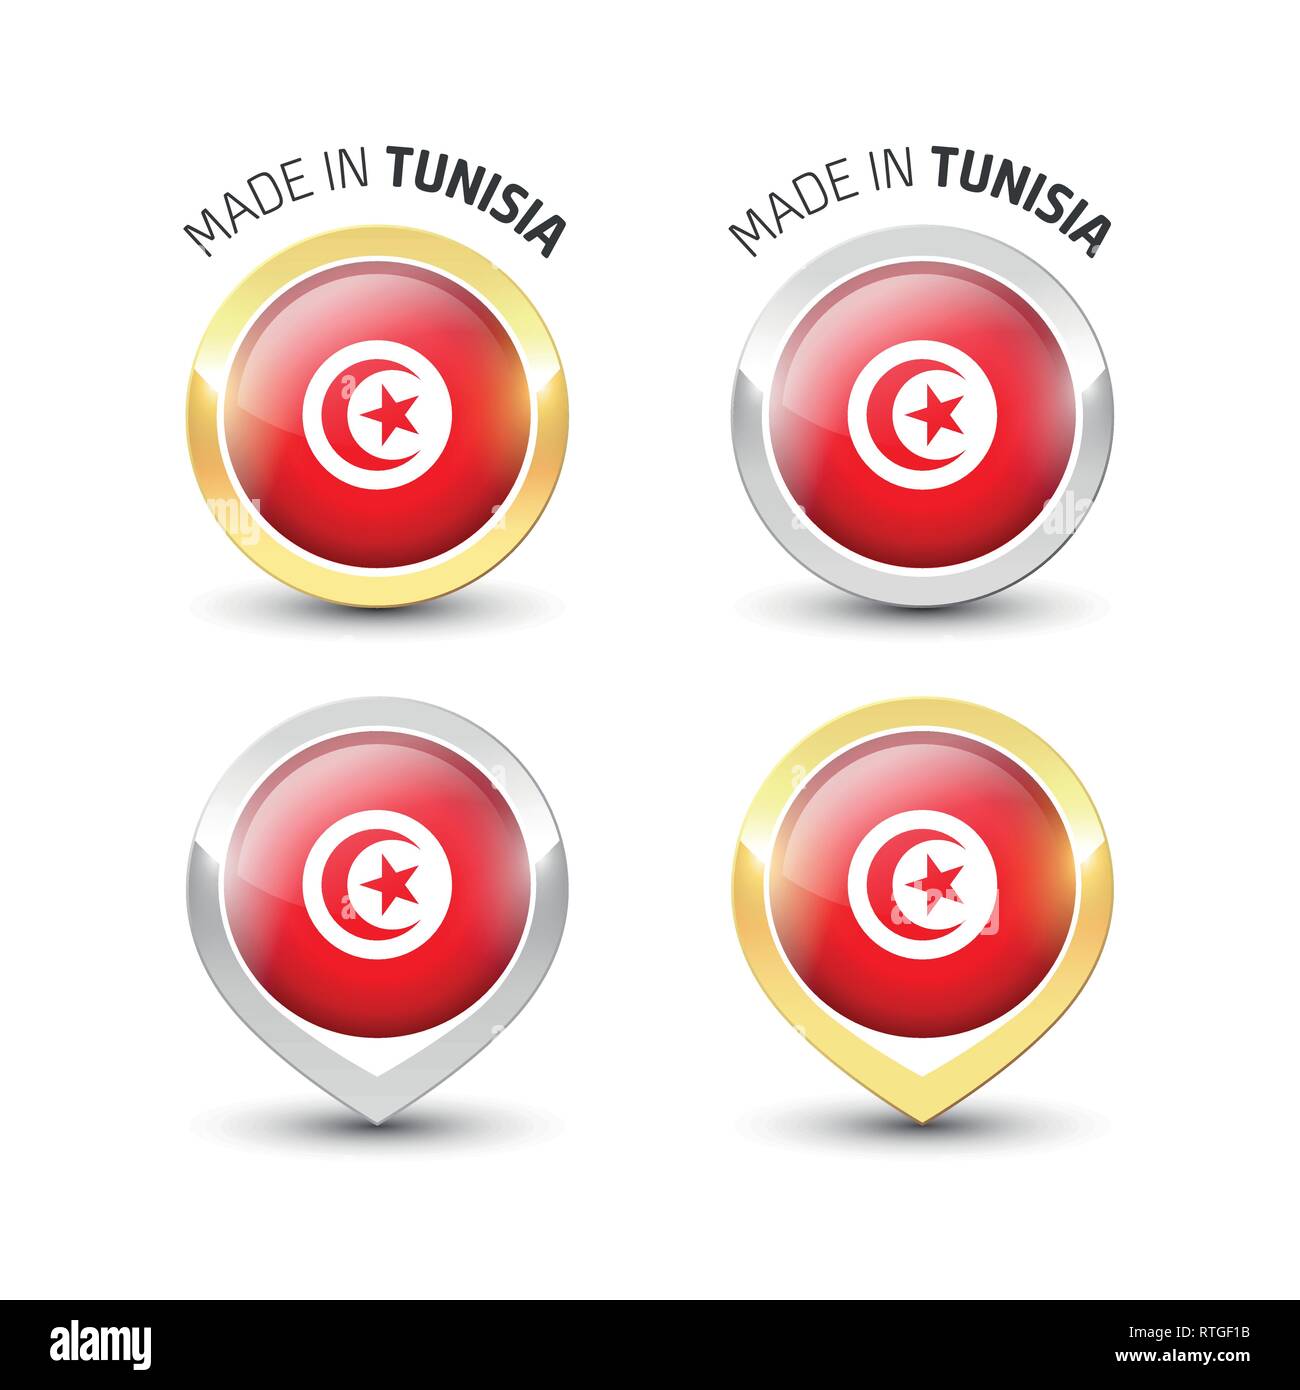 Made in Tunisia - Guarantee label with the Tunisian flag inside round gold and silver icons. Stock Vector